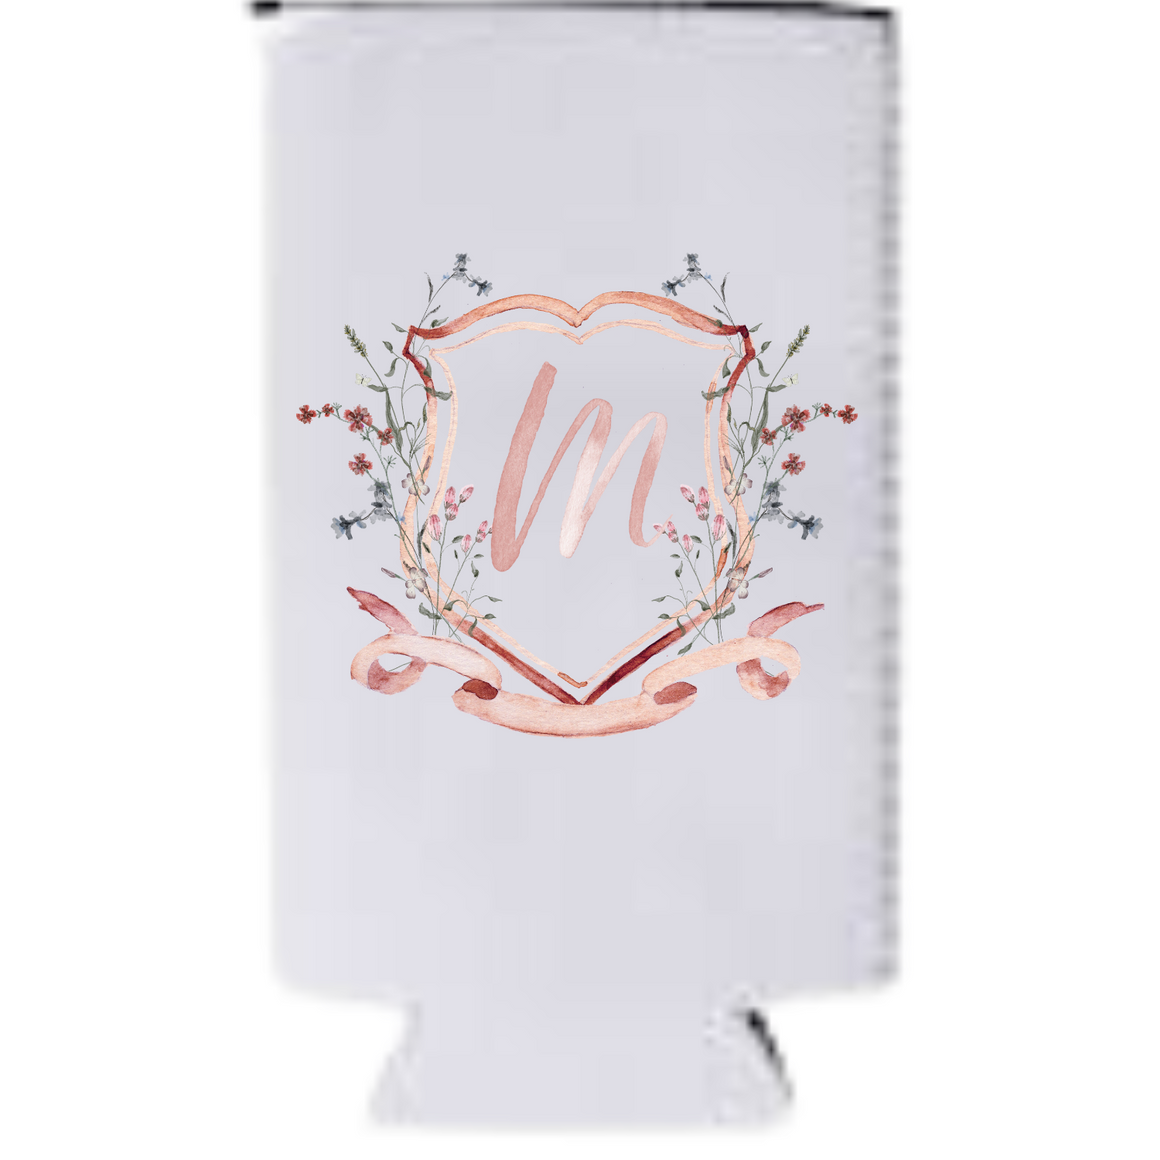 12oz Can Coolers Wildflower Watercolor Motif in Blush (customizable), Standard or Slim, $3.300